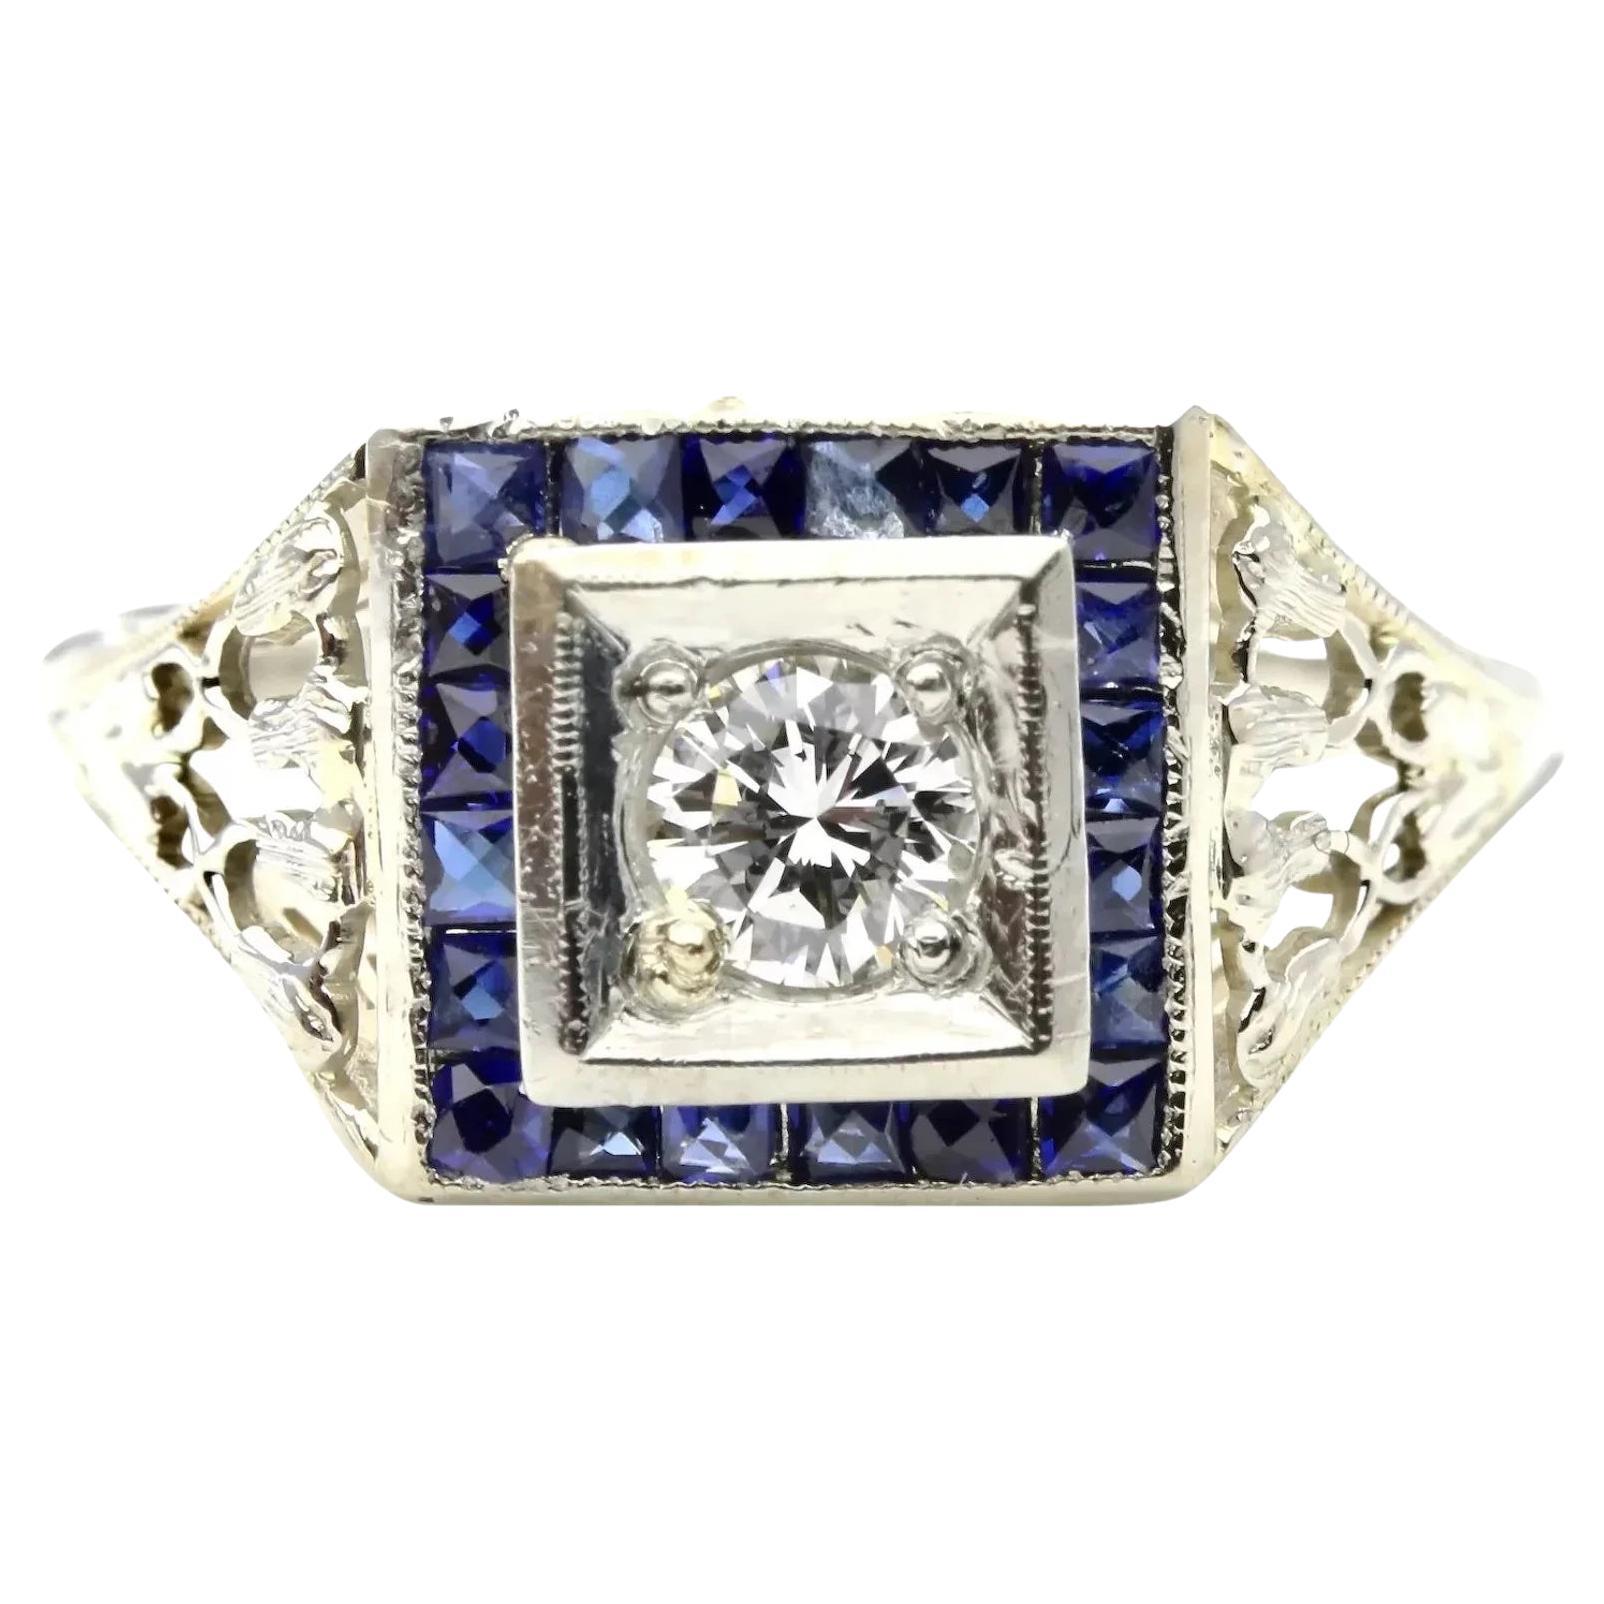 Art Deco 0.60ctw Diamond & French Cut Sapphire Halo Ring in 18K White Gold